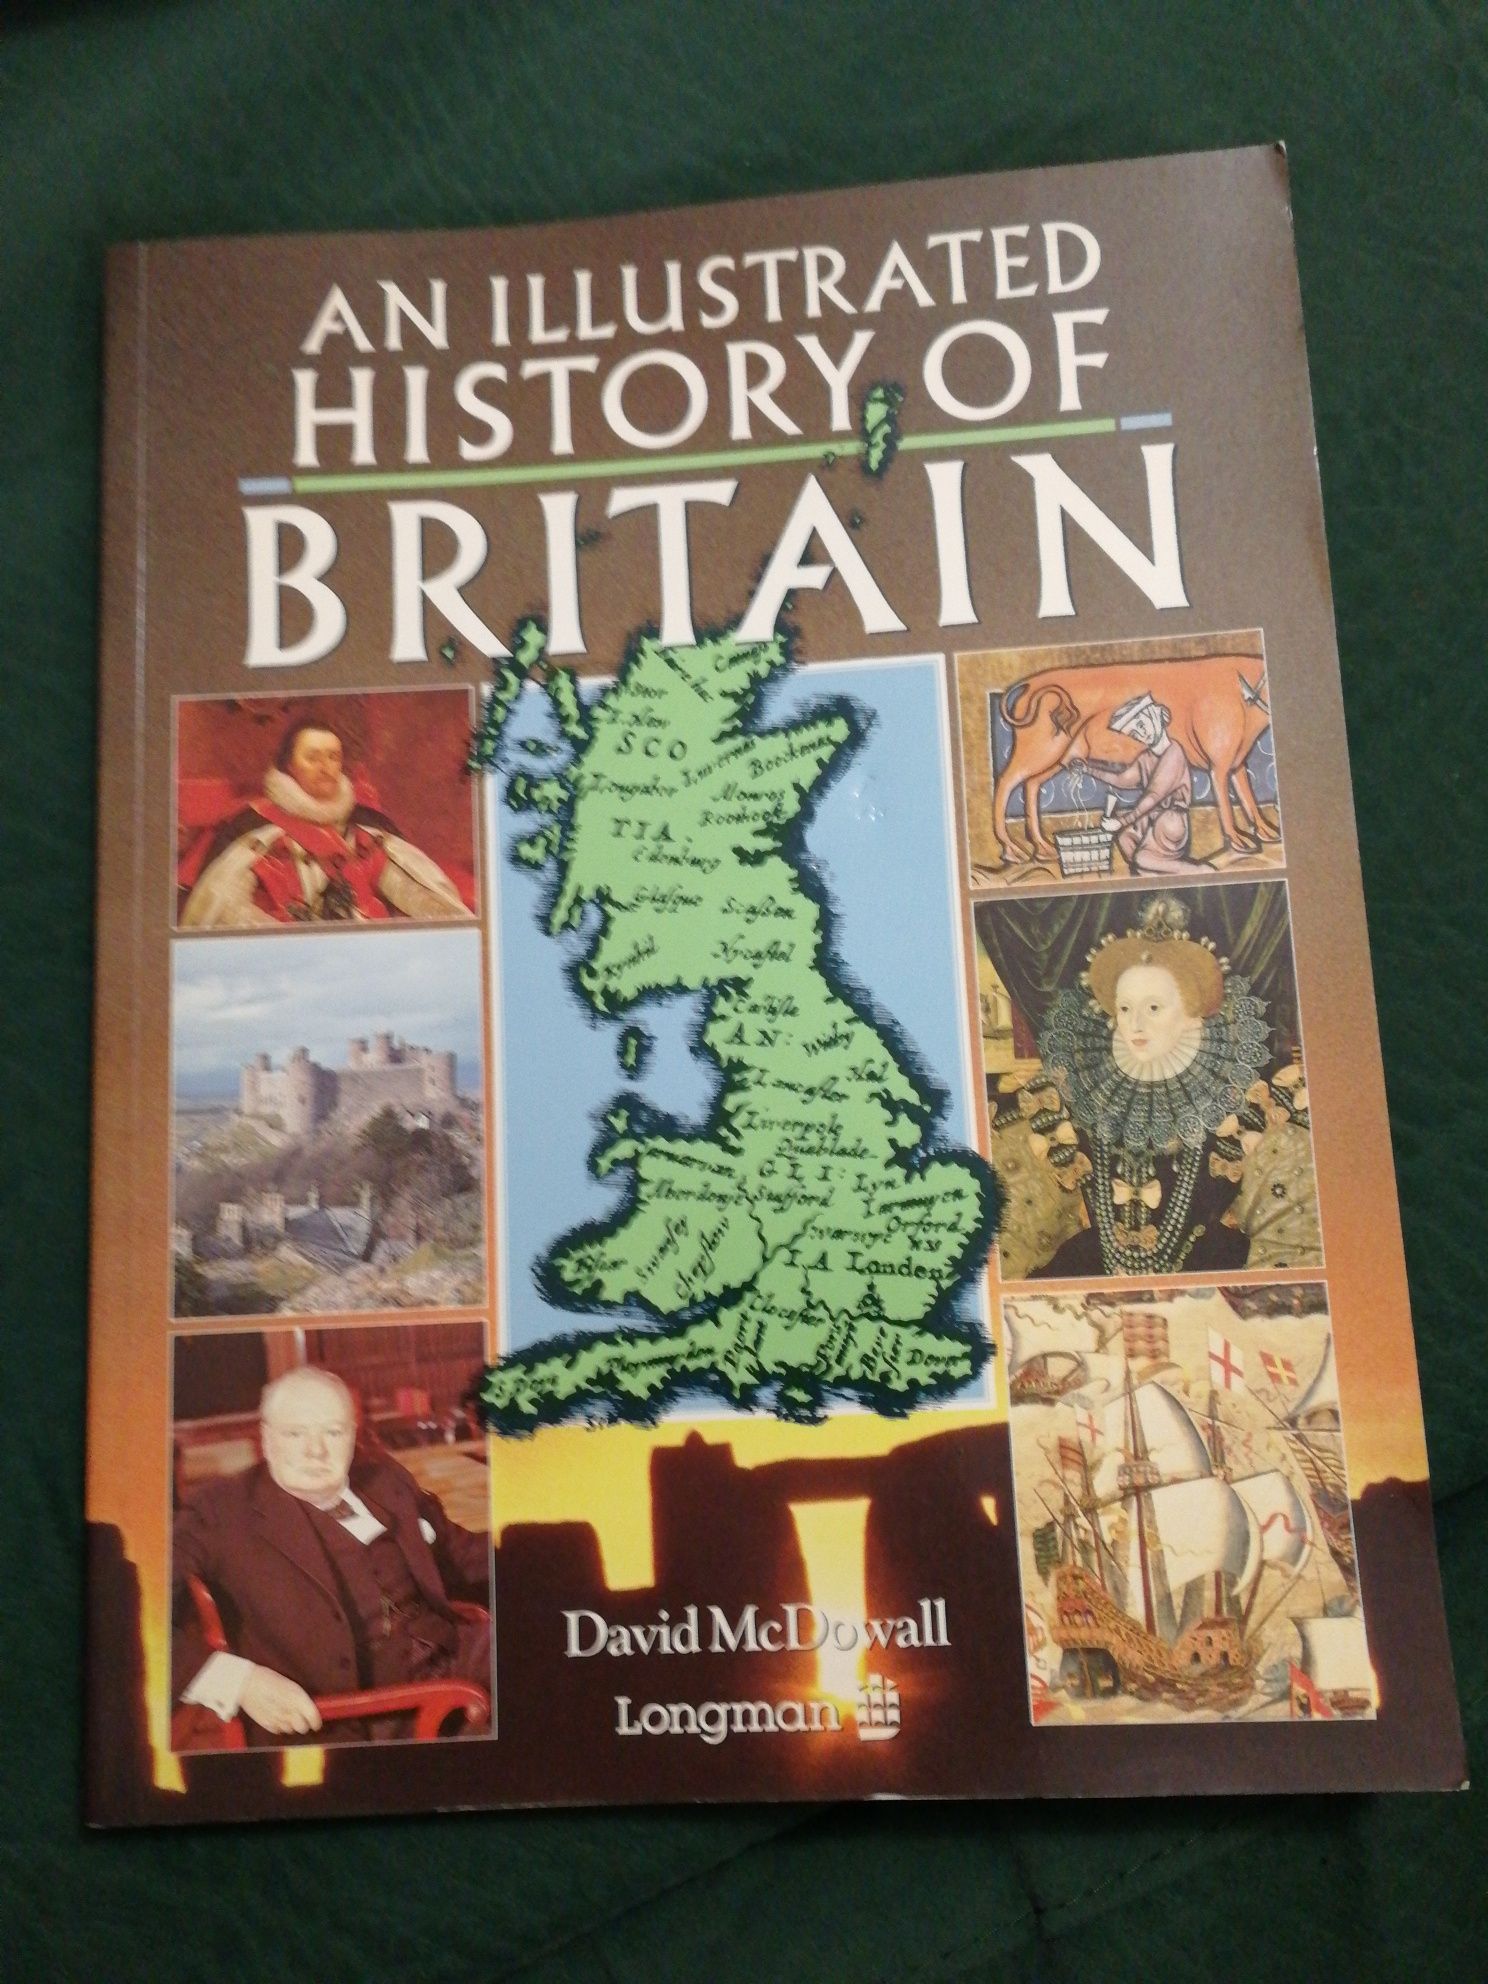 Livro "An Illustrated History of Britain"